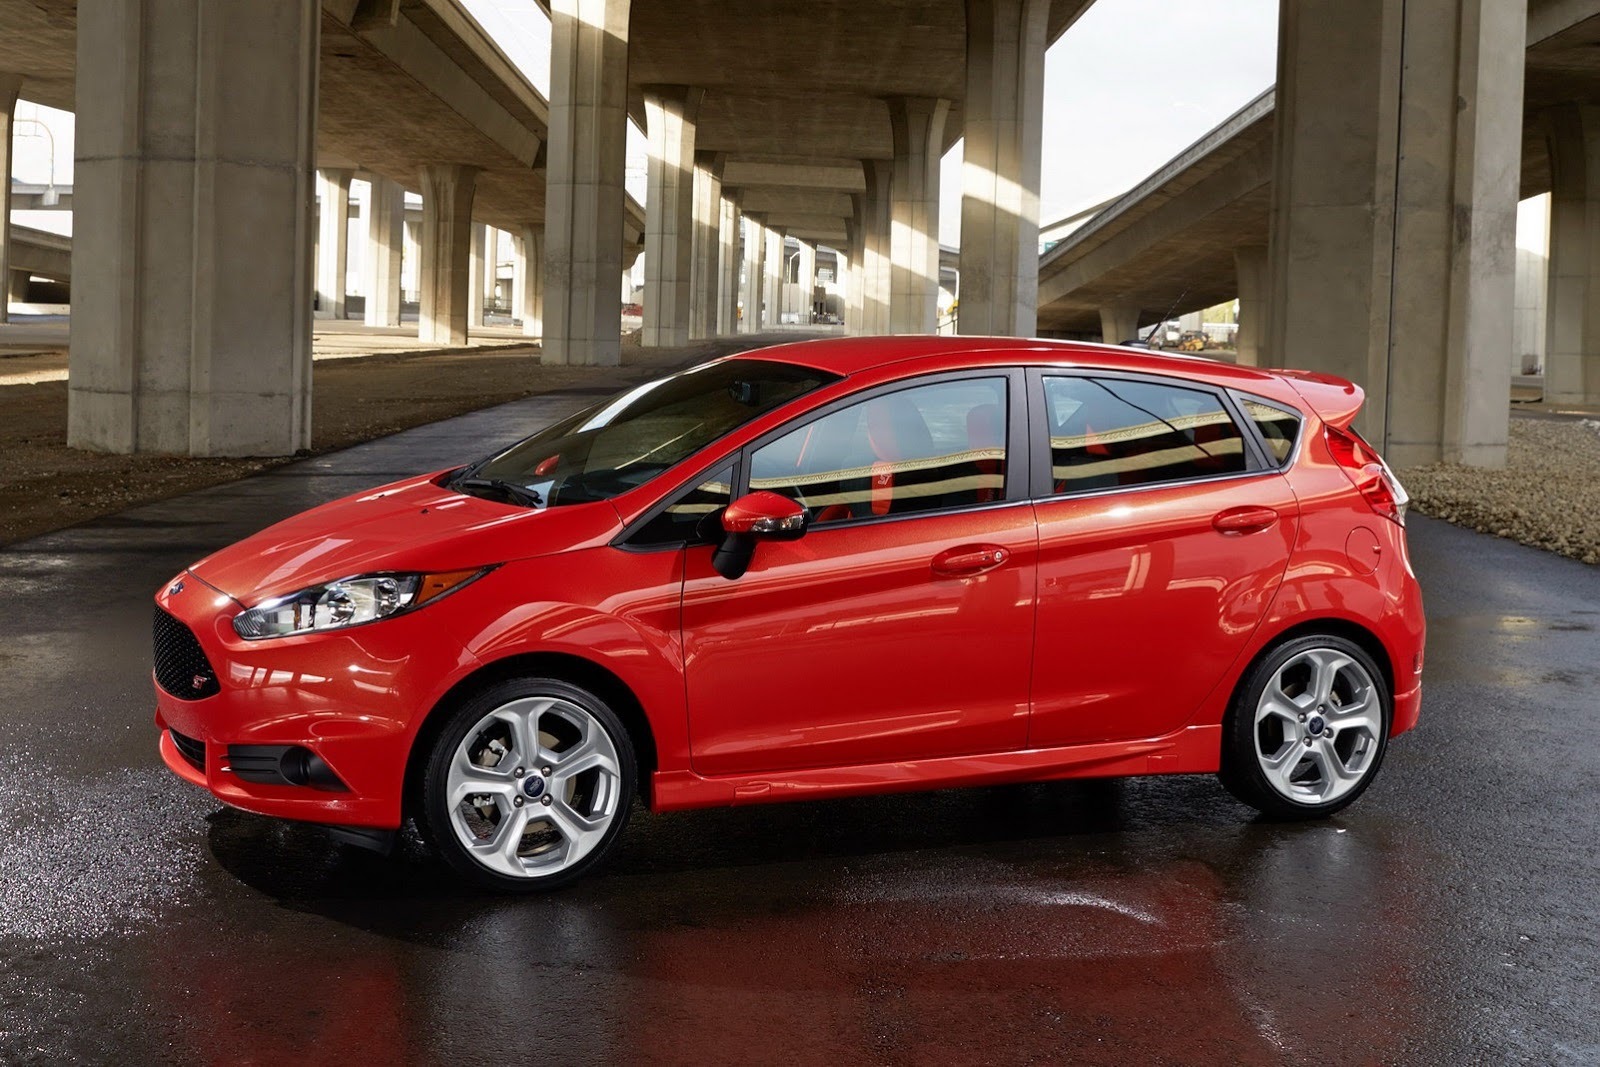 2014 RED Ford Fiesta ST Pictures, Mods, Upgrades, Wallpaper - DragTimes.com